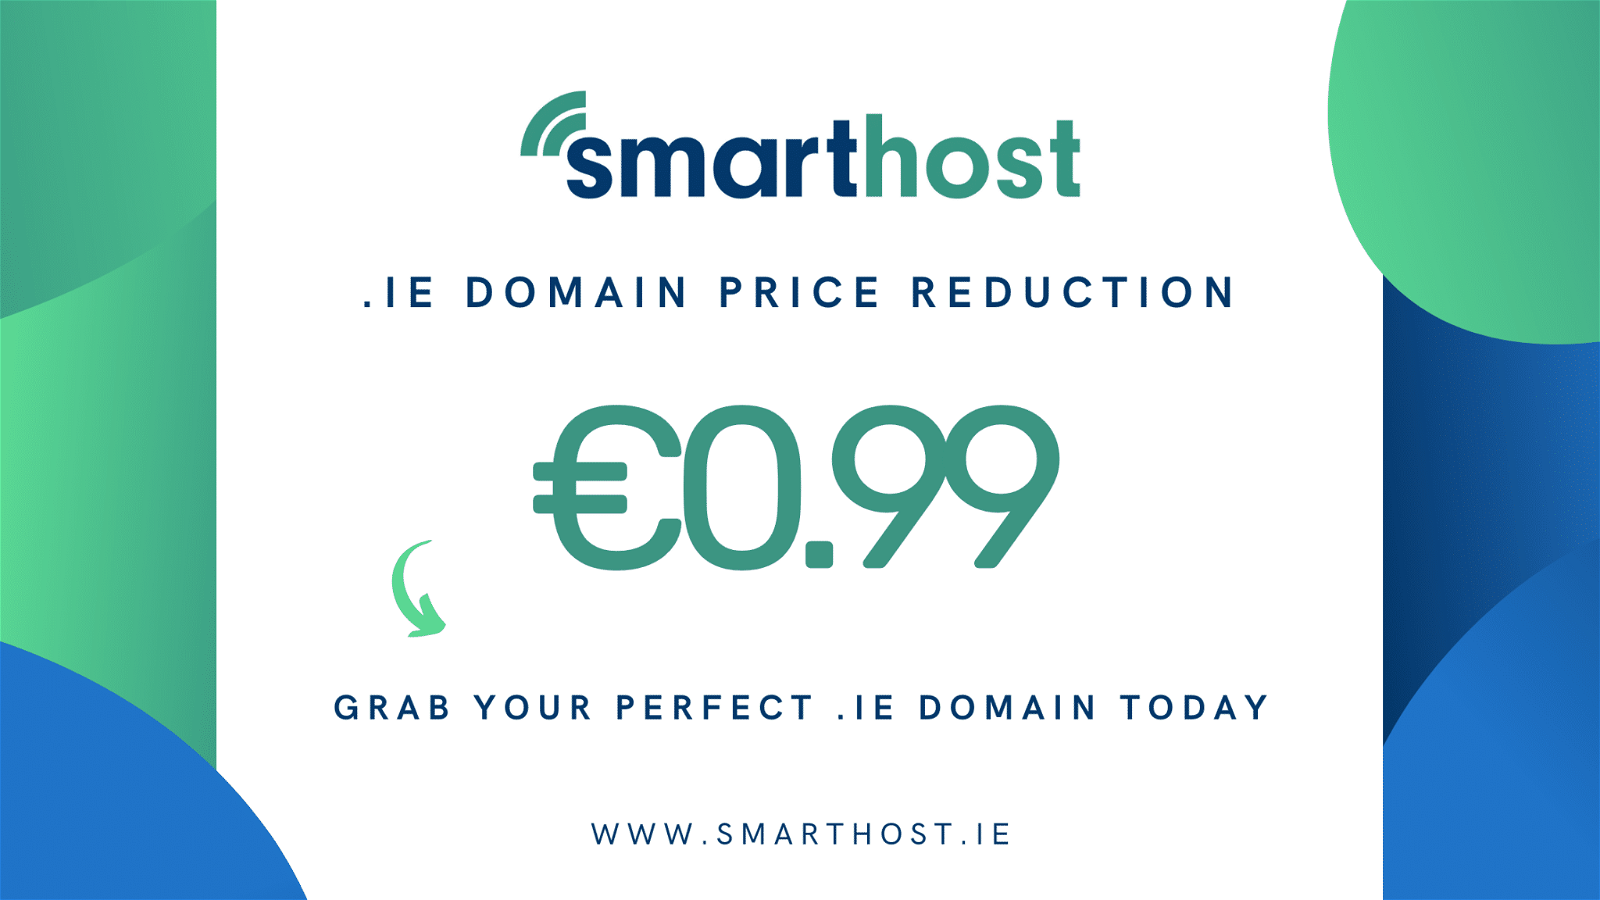 The image is advertising a price reduction for .ie domain names from SmartHost.ie.